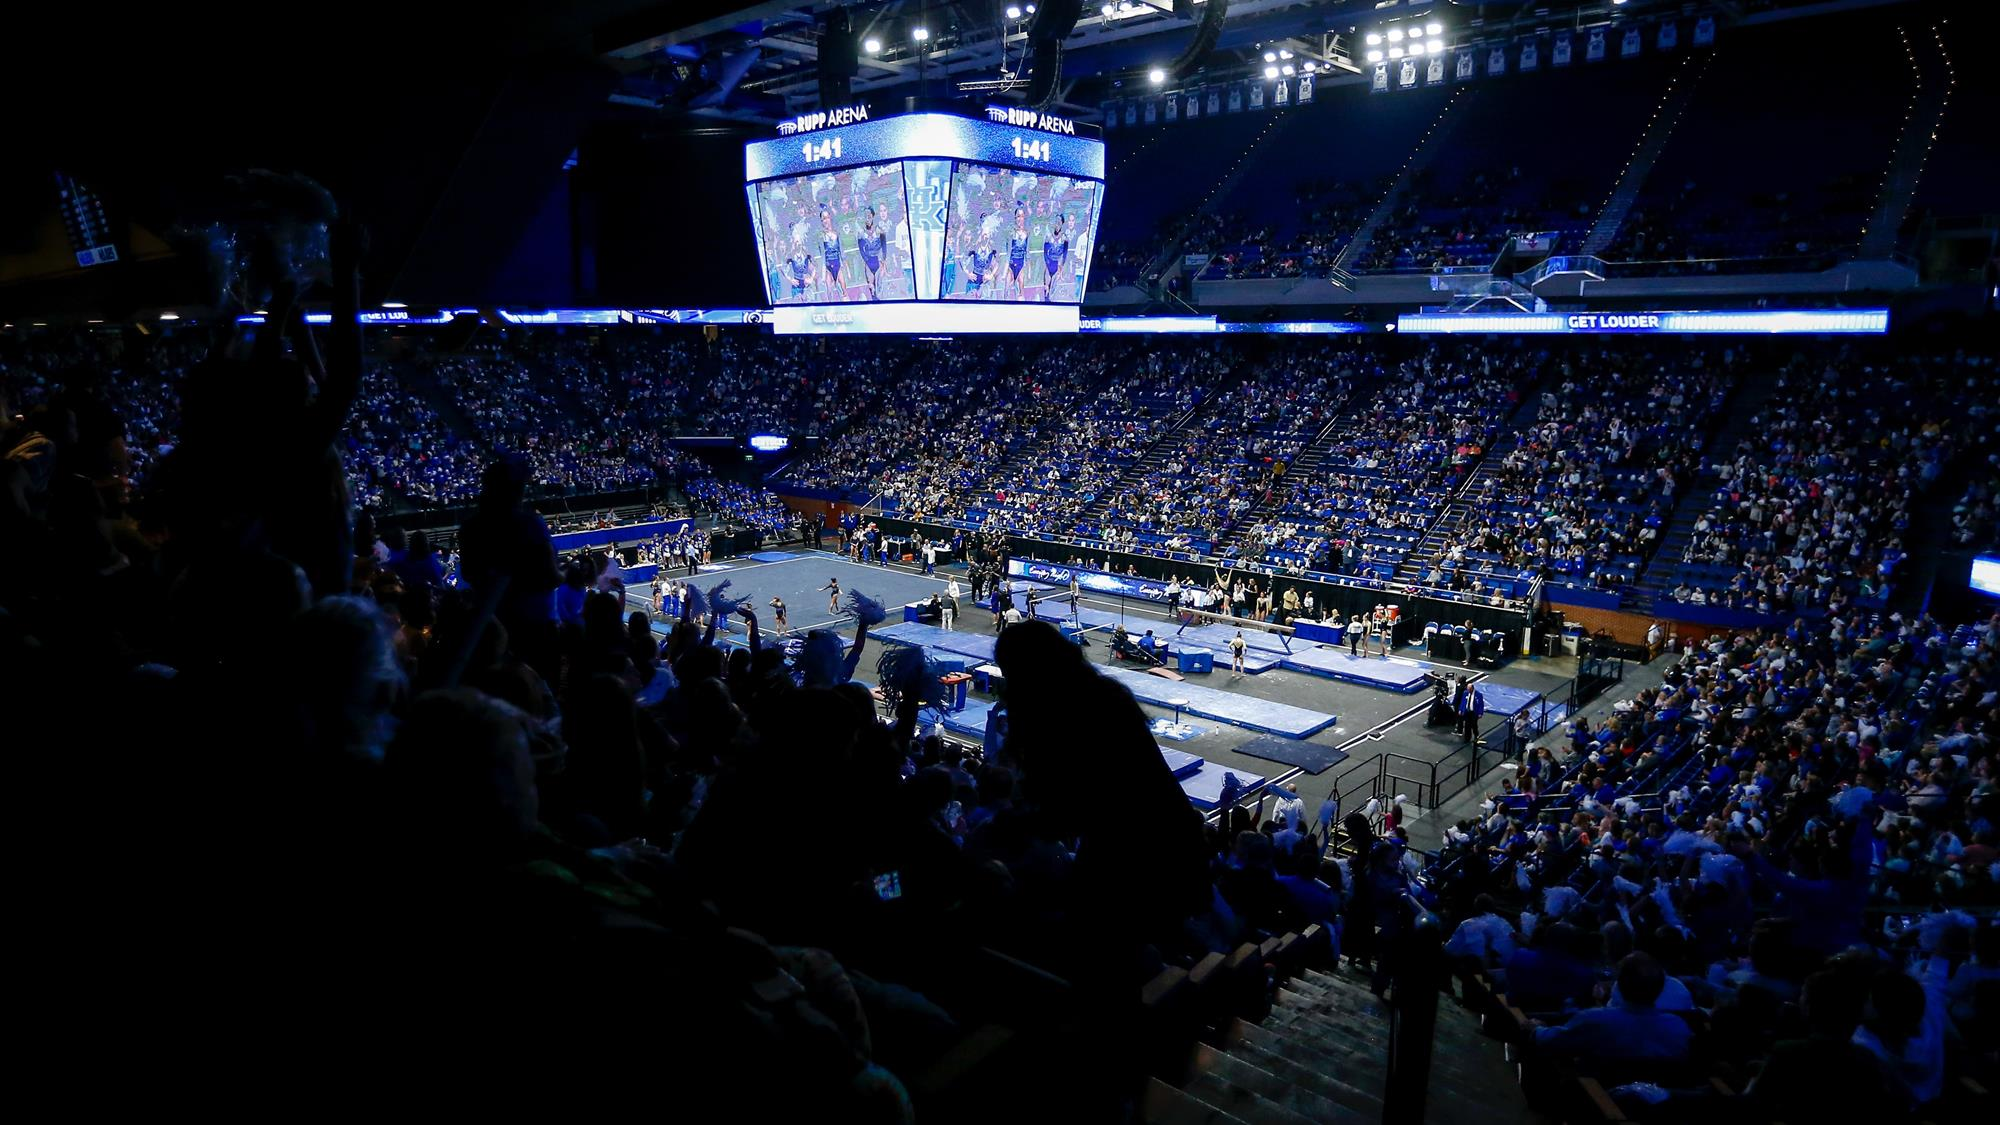 UK Faculty and Staff Complimentary Ticket Offer for UK Gymnastics Excite Night